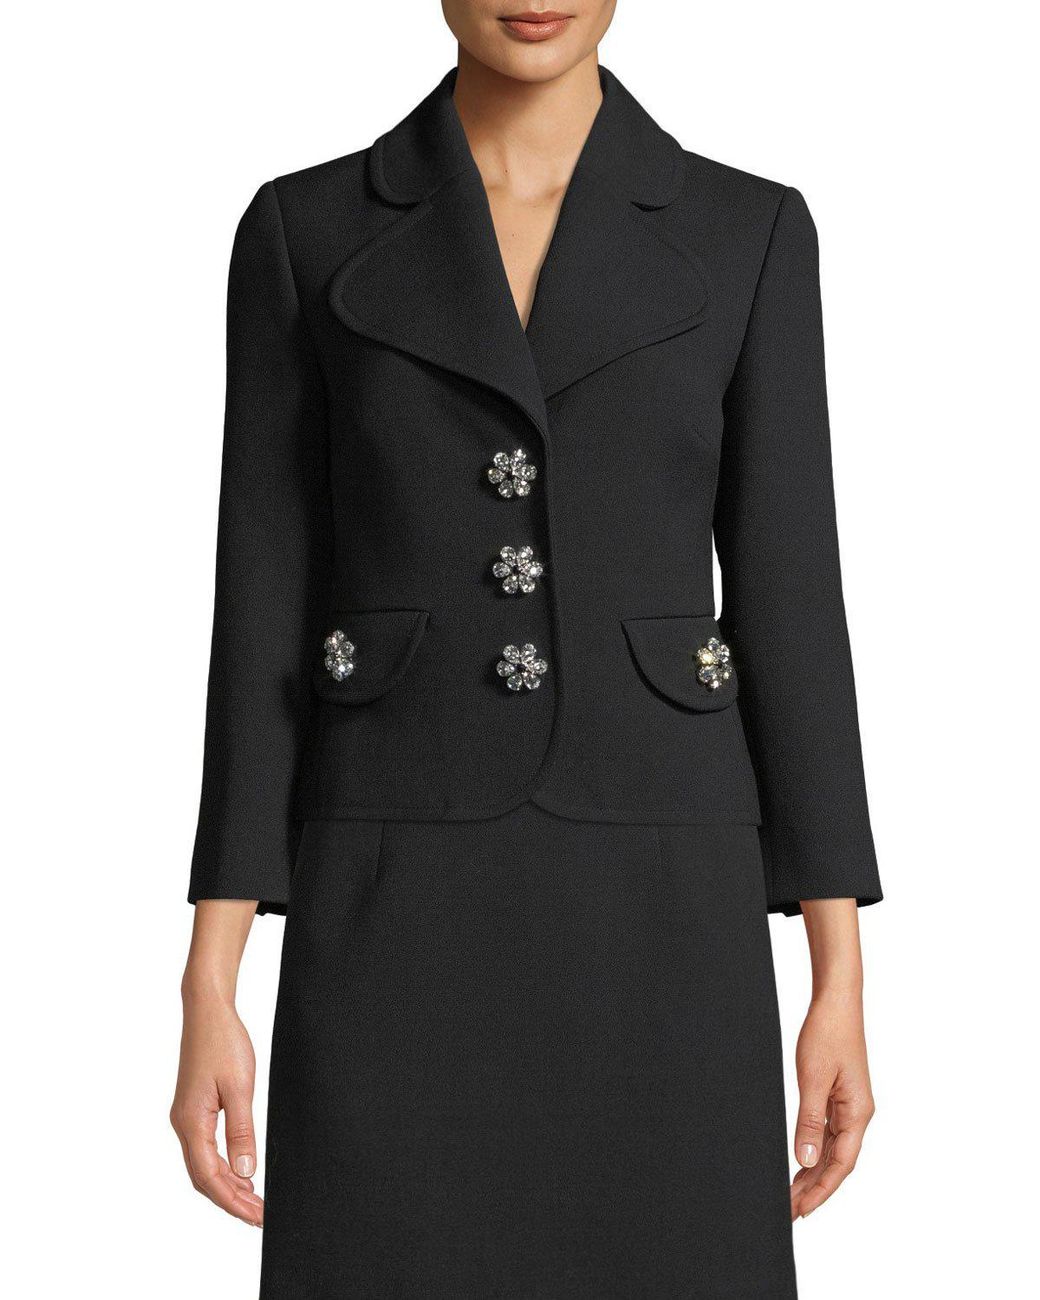 Lyst - Michael Kors Jewel-buttons Cropped Wool Crepe Broadcloth Jacket ...